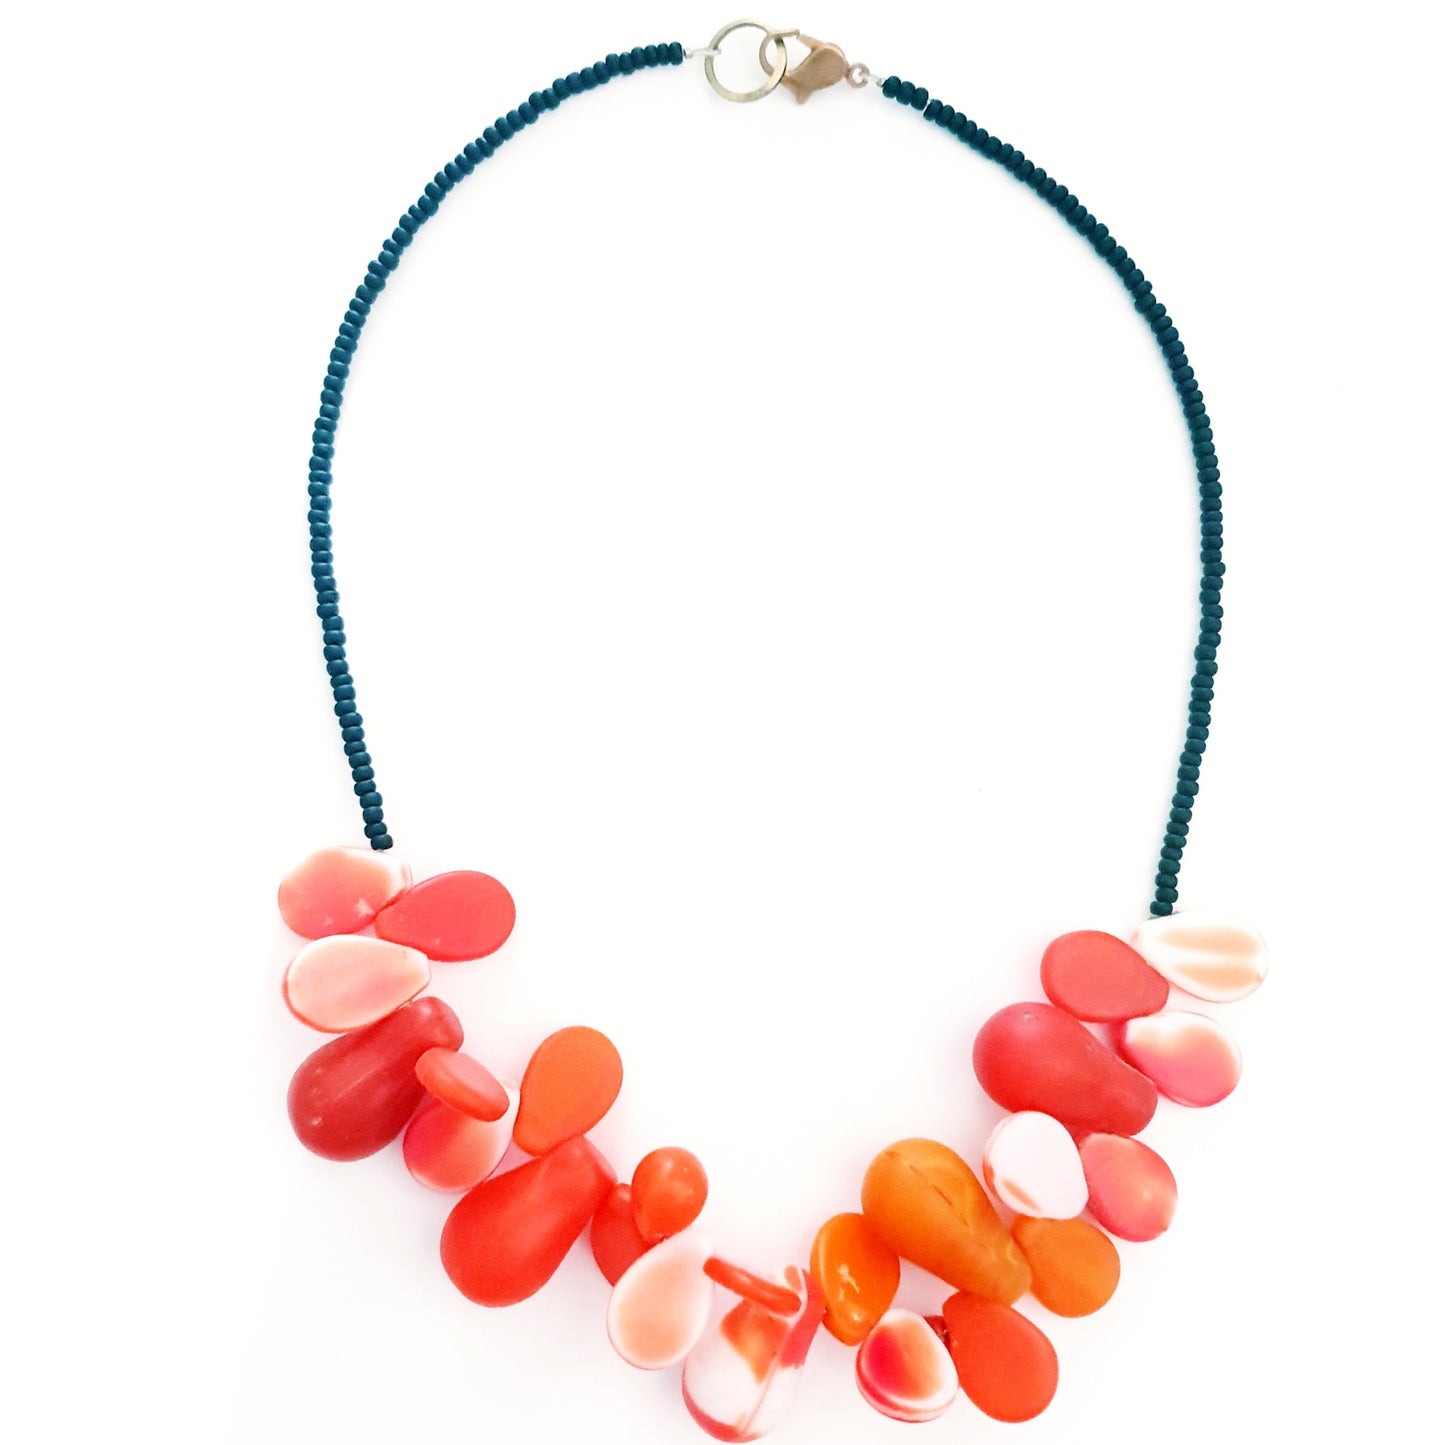 African Trade Bead Orange and White Necklace